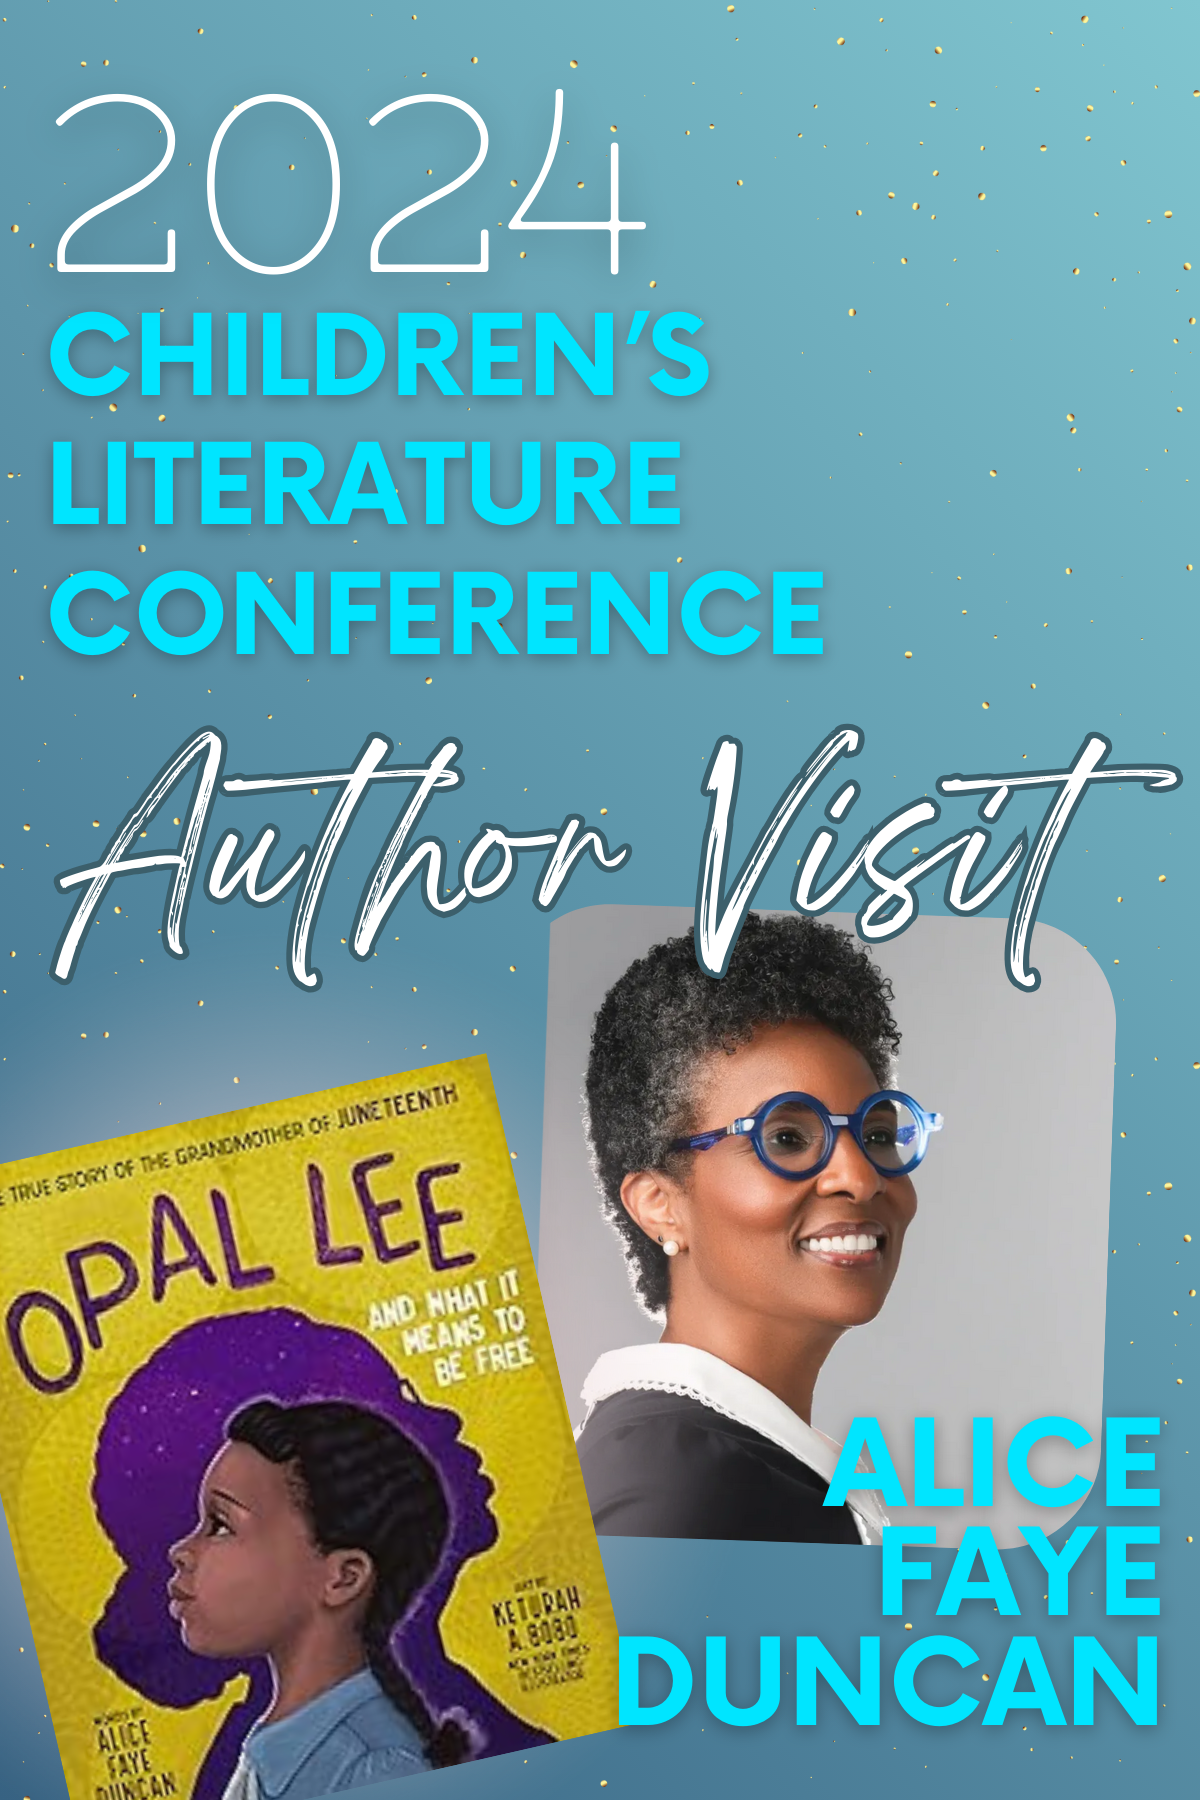 Virtual Author Visit & Corresponding Happy Hour with Alice Faye Duncan